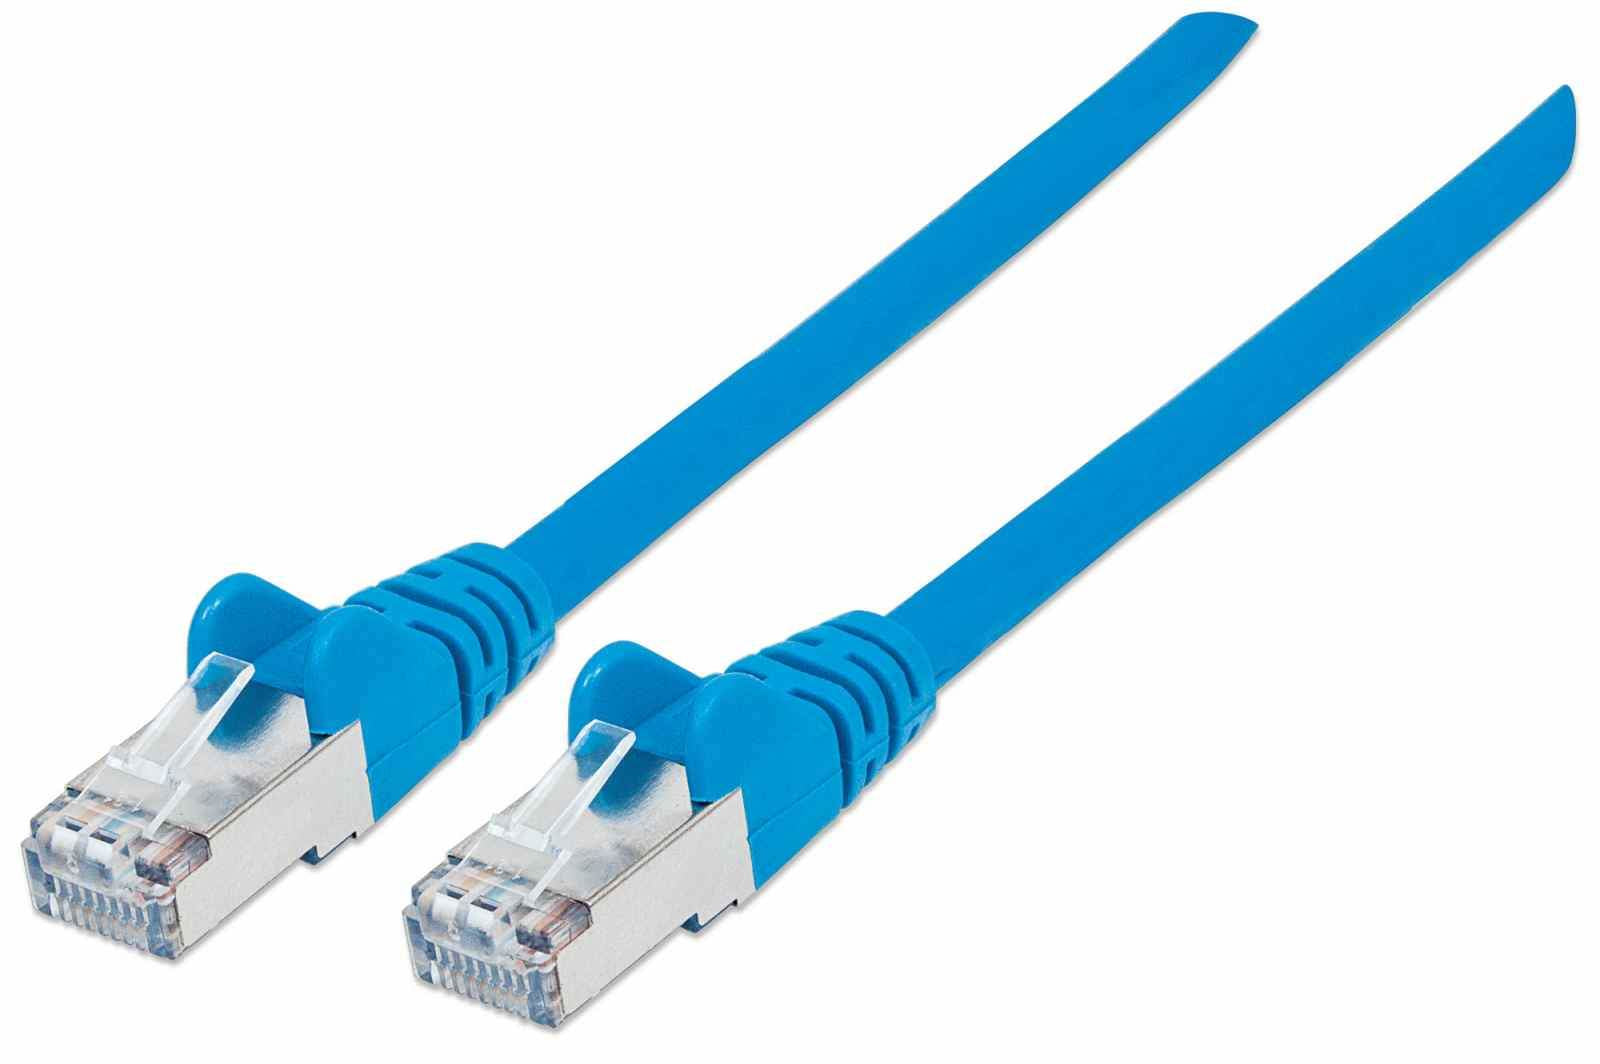 Intellinet Network Patch Cable, Cat7 Cable/Cat6A Plugs, 3m, Blue, Copper, S/FTP, LSOH / LSZH, PVC, RJ45, Gold Plated Contacts, Snagless, Booted, Lifetime Warranty, Polybag